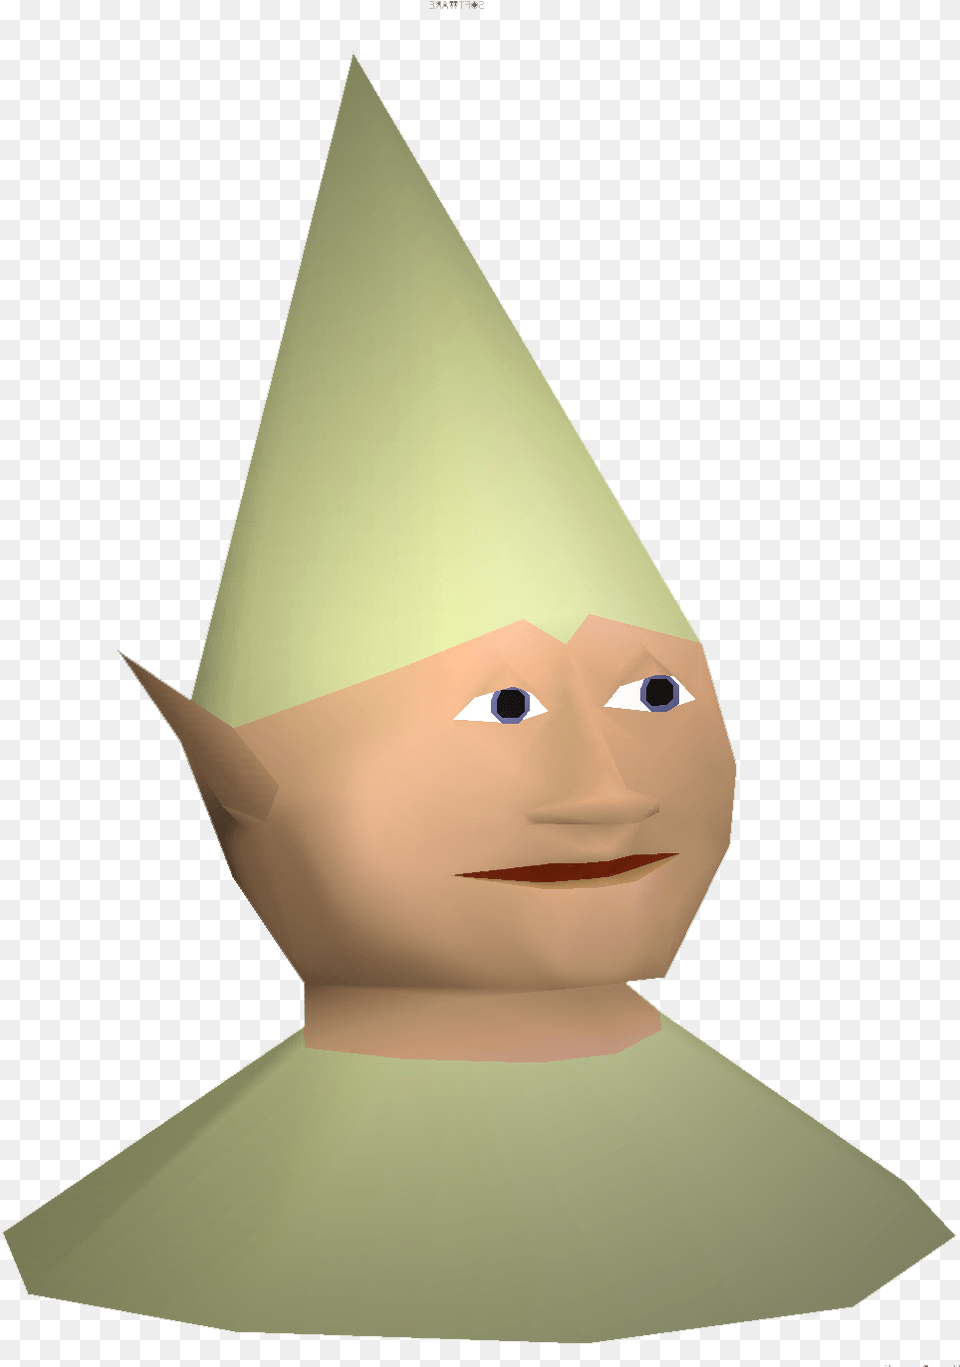 Runescape Gnome Child Old School Runescape Face, Clothing, Hat, Party Hat, Baby Png Image